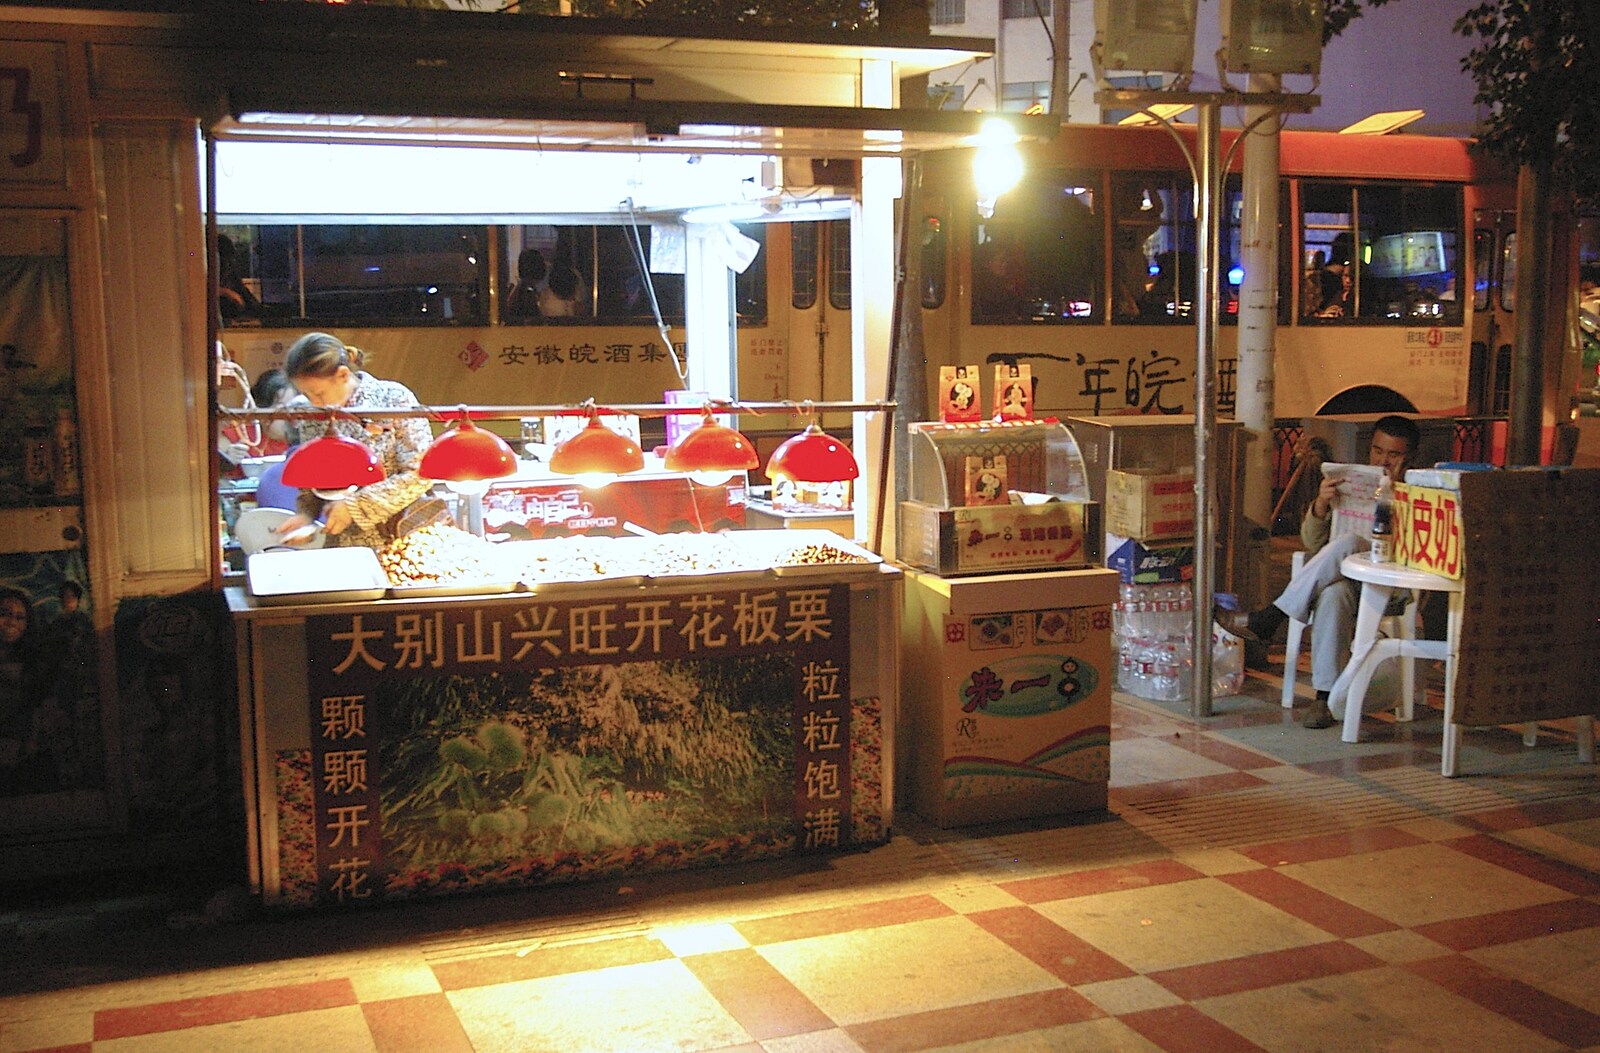 Down on the streets, the first of many food stalls from Nanjing by Night, Nanjing, Jiangsu Province, China - 4th October 2006